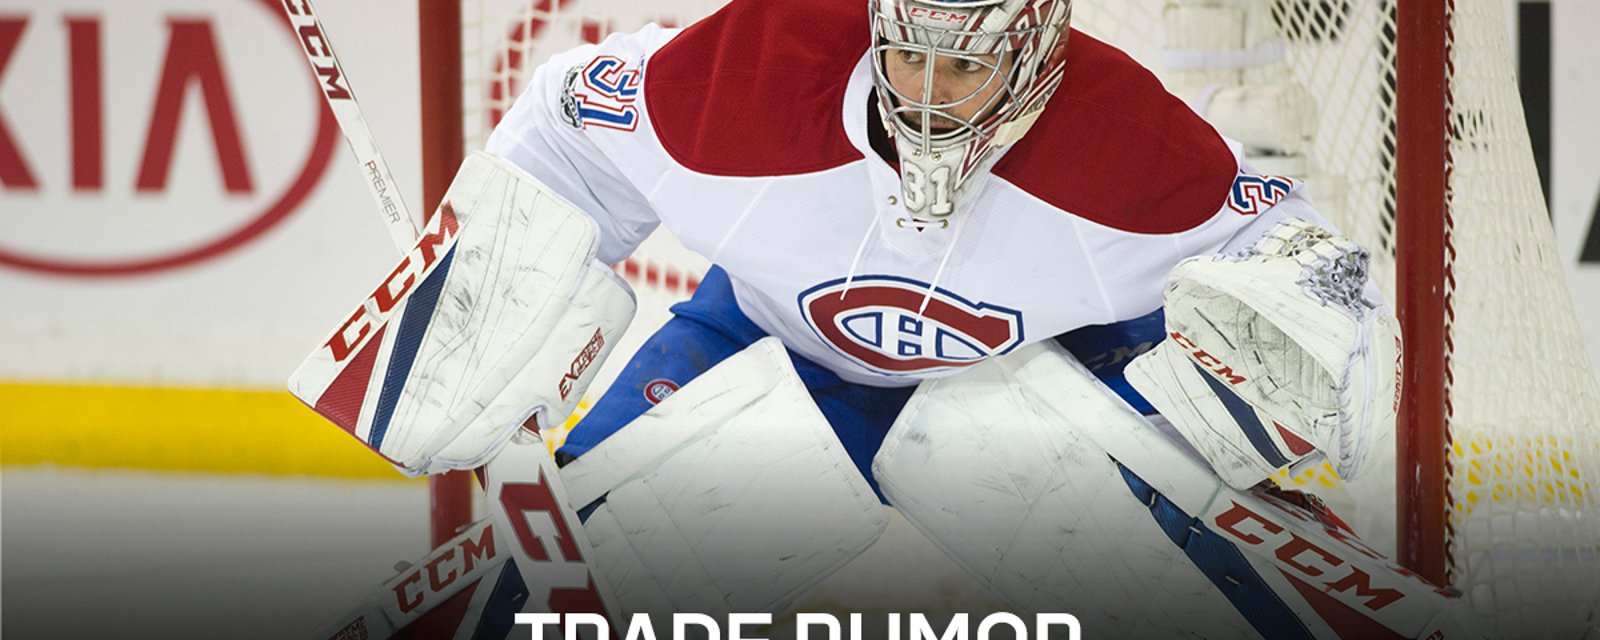 Rumor: Does Price want out of Montreal?